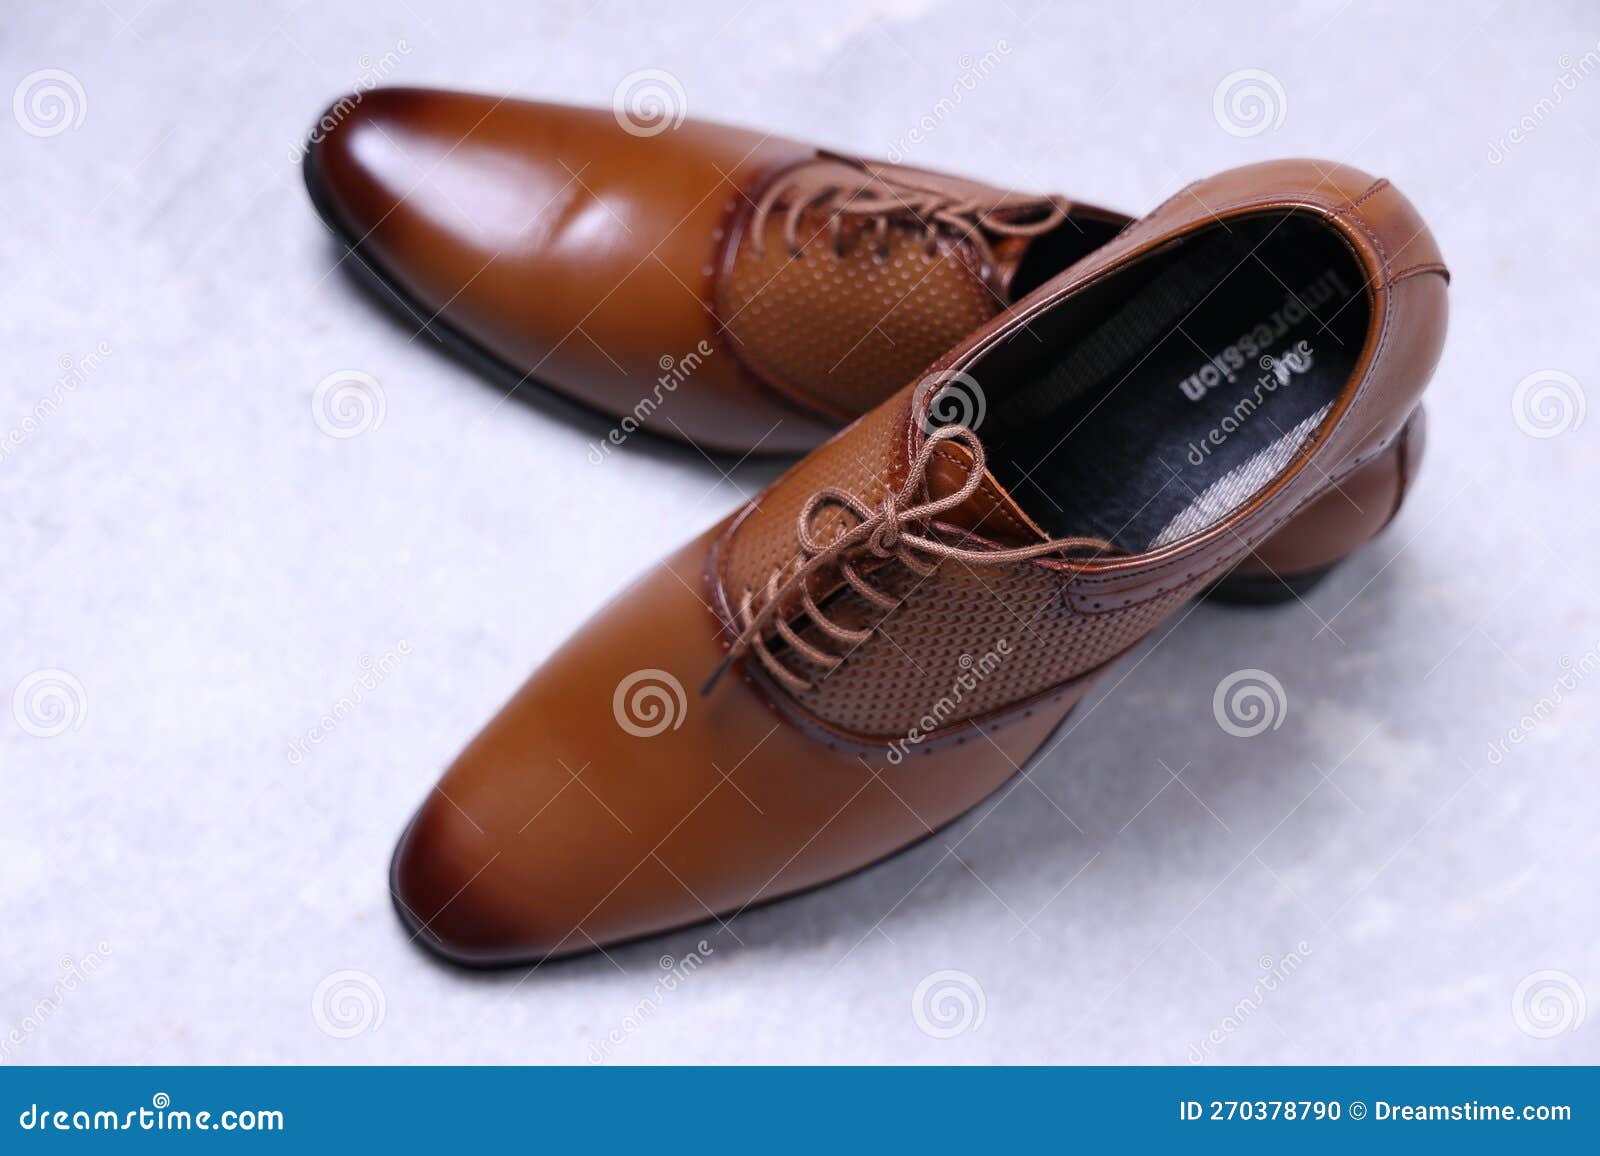 Pair of Mens Shoes Isolated on White Background Stock Photo - Image of ...